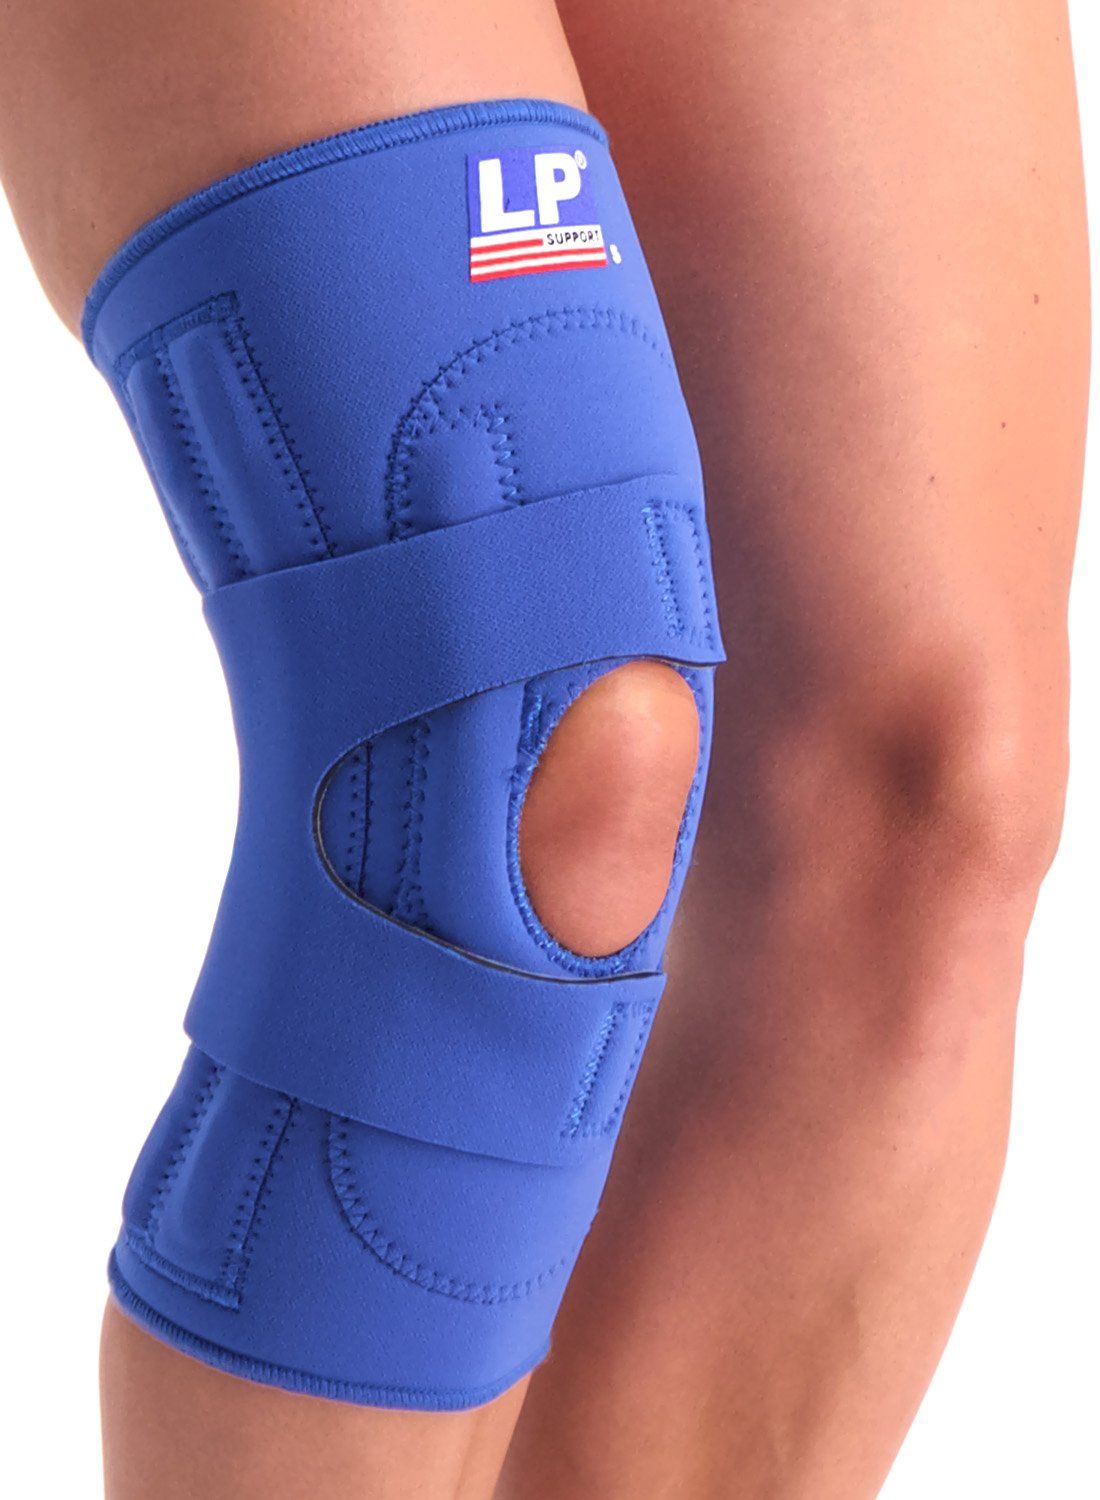 LP Support 721 Knee support for sale